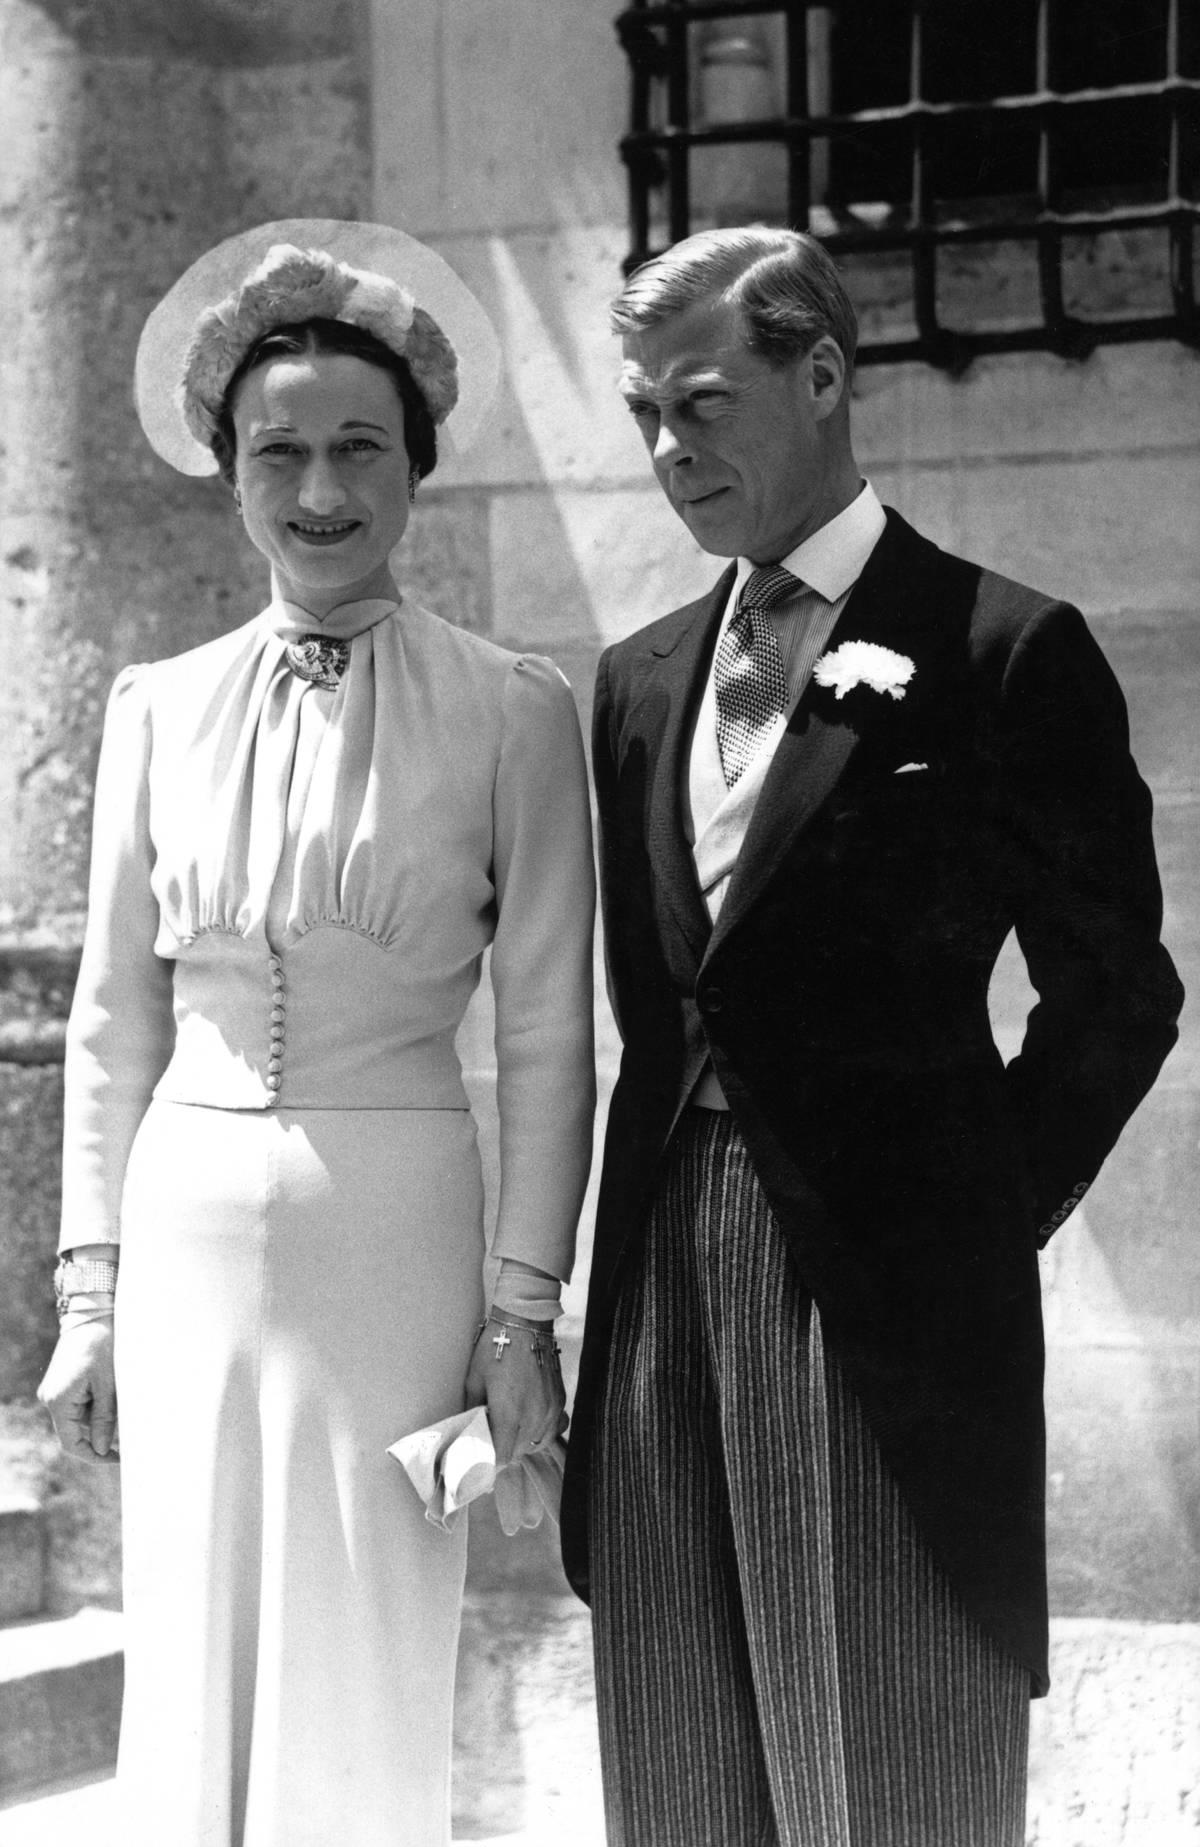 <p>One of the biggest royal family wedding scandals to occur was because of King Edward VIII. Only a short 324 days into his reign, he decided to abdicate the throne. His decision was because he fell in love with Wallis Simpson.</p> <p>Simpson didn't come from one of the world's royal families. Not only that, but she was an American divorcee who was going on her second divorce! She and Edward were technically having an affair before the second divorce was finalized.</p>